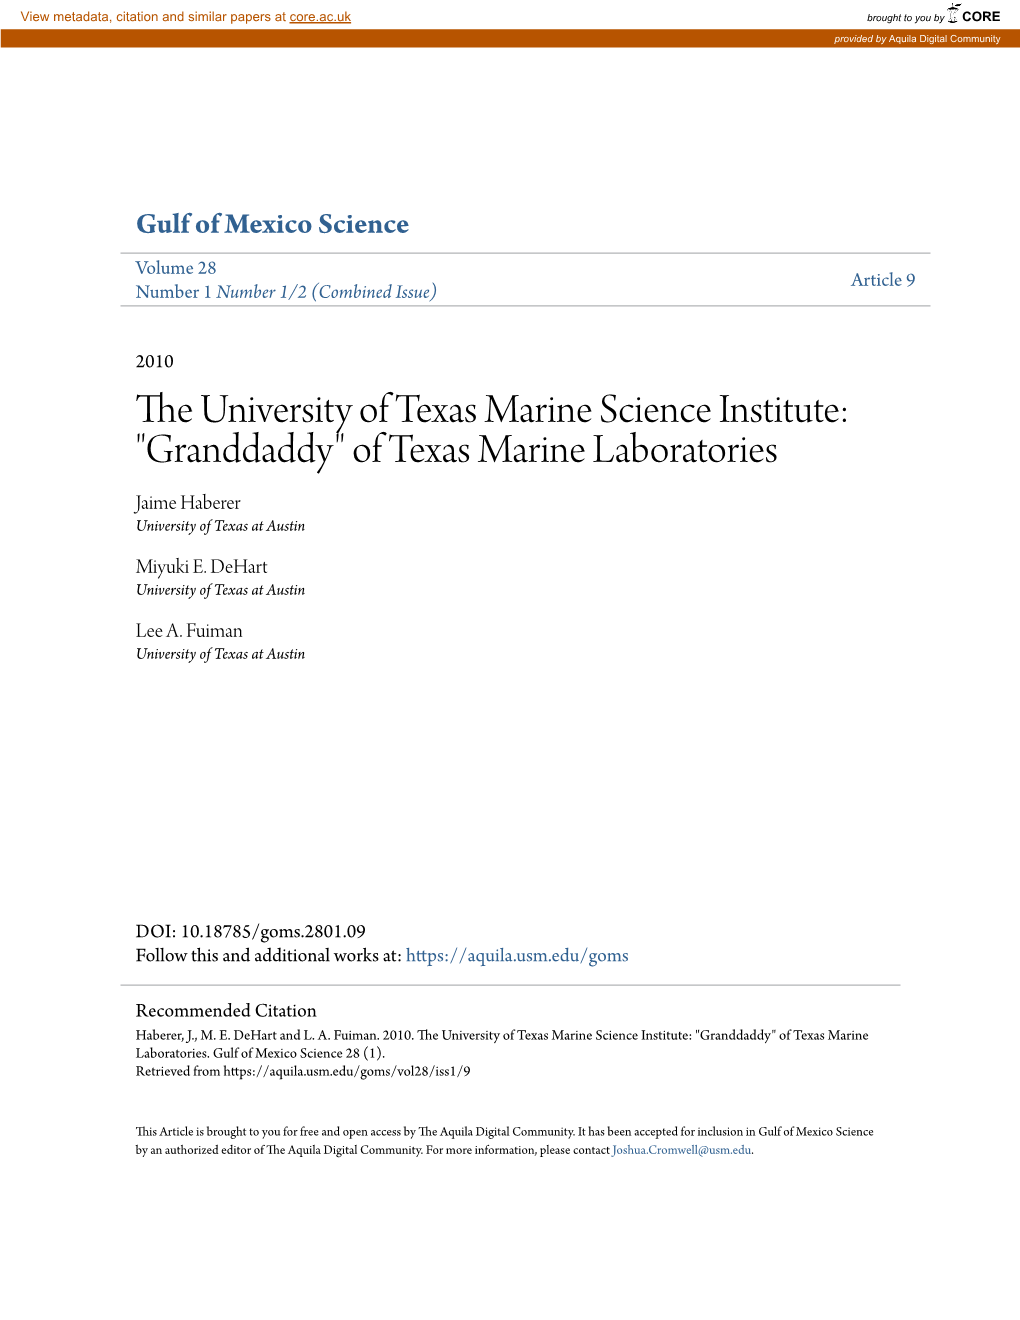 The University of Texas Marine Science Institute: "Granddaddy" Of